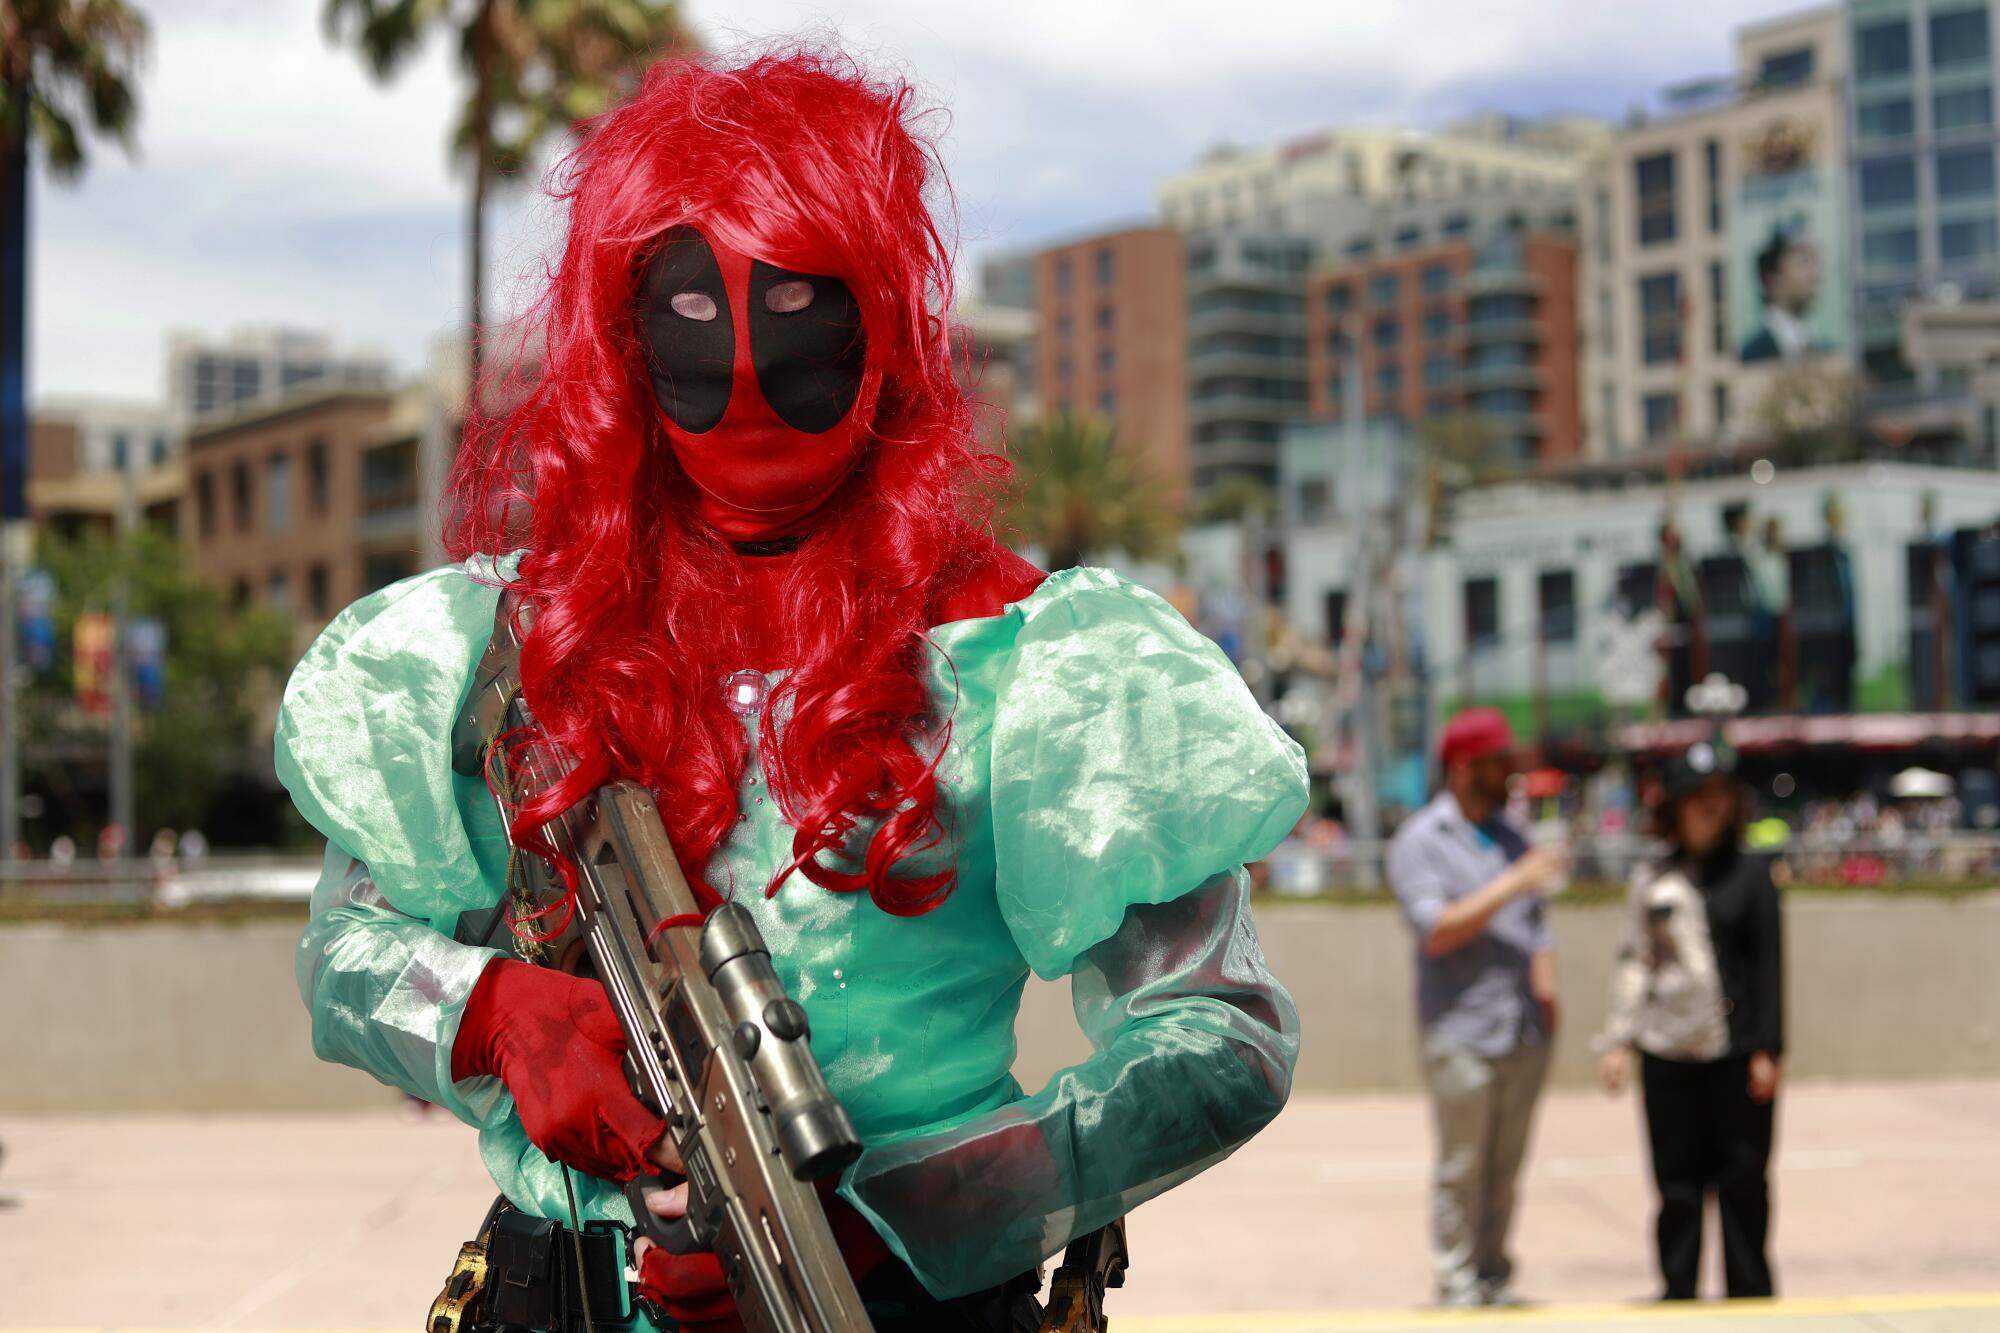 Braden Coss of San Diego dressed as Ariel Deadpool at Comic-Con.